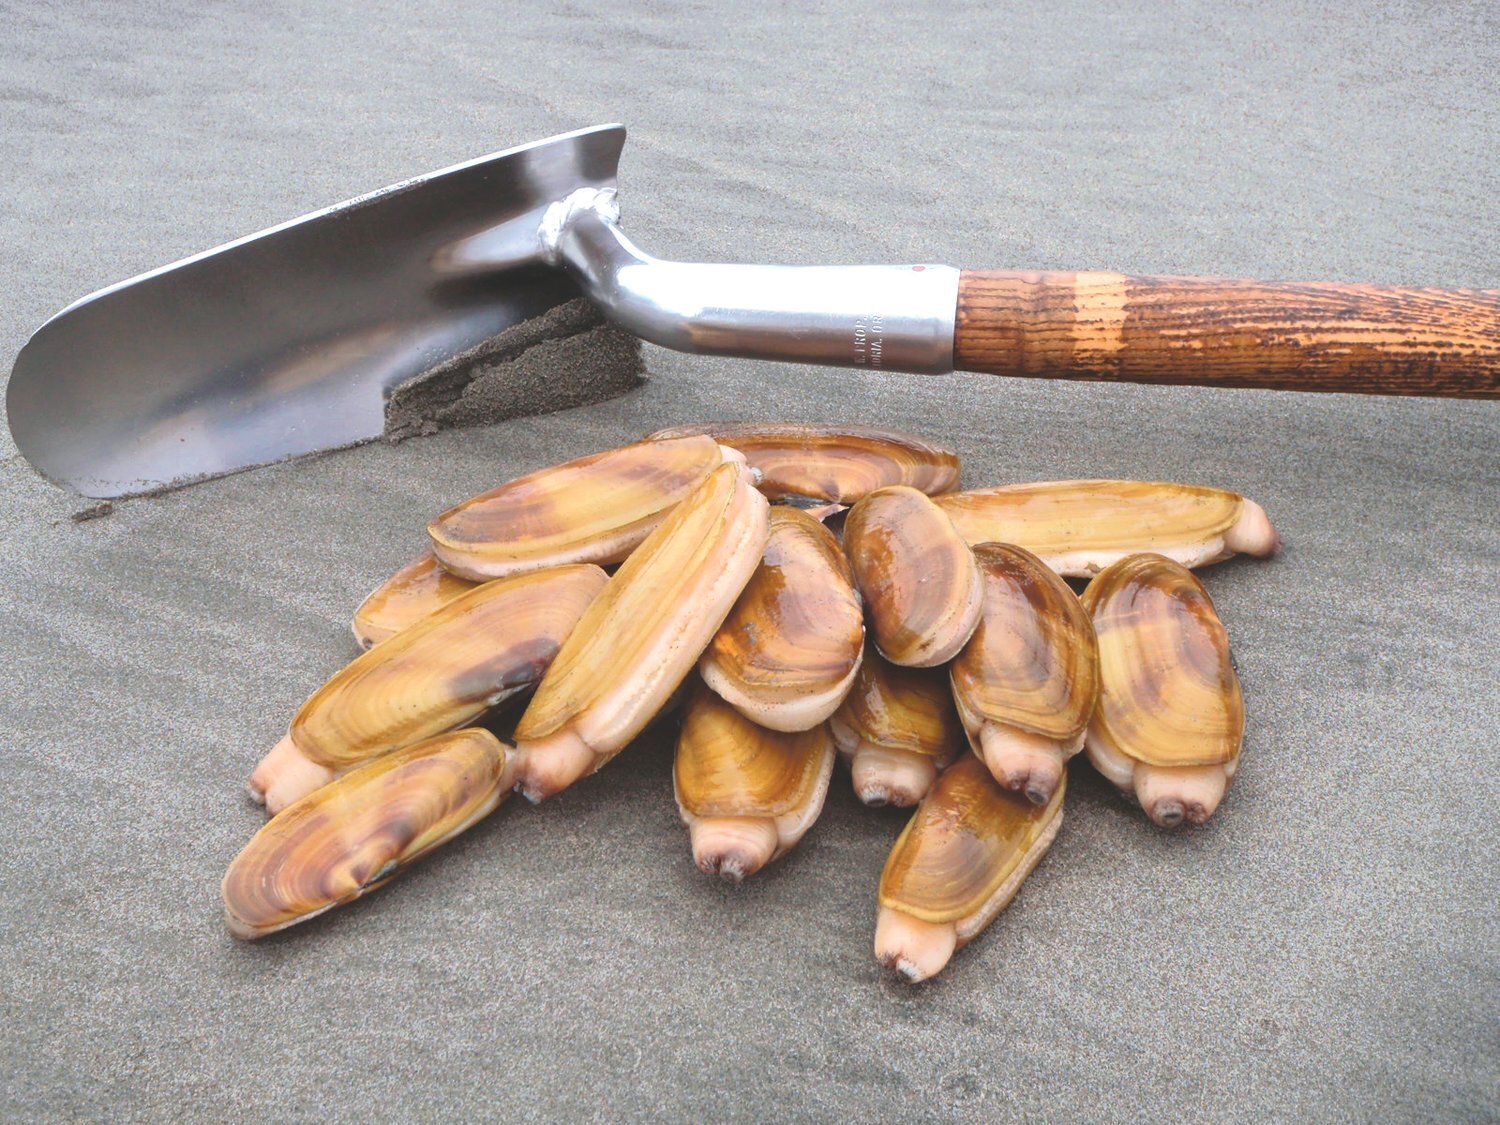 The Washington Department of Fish and Wildlife announced all recreational razor clam digs will remain closed until further notice due to unsafe domoic acid levels.